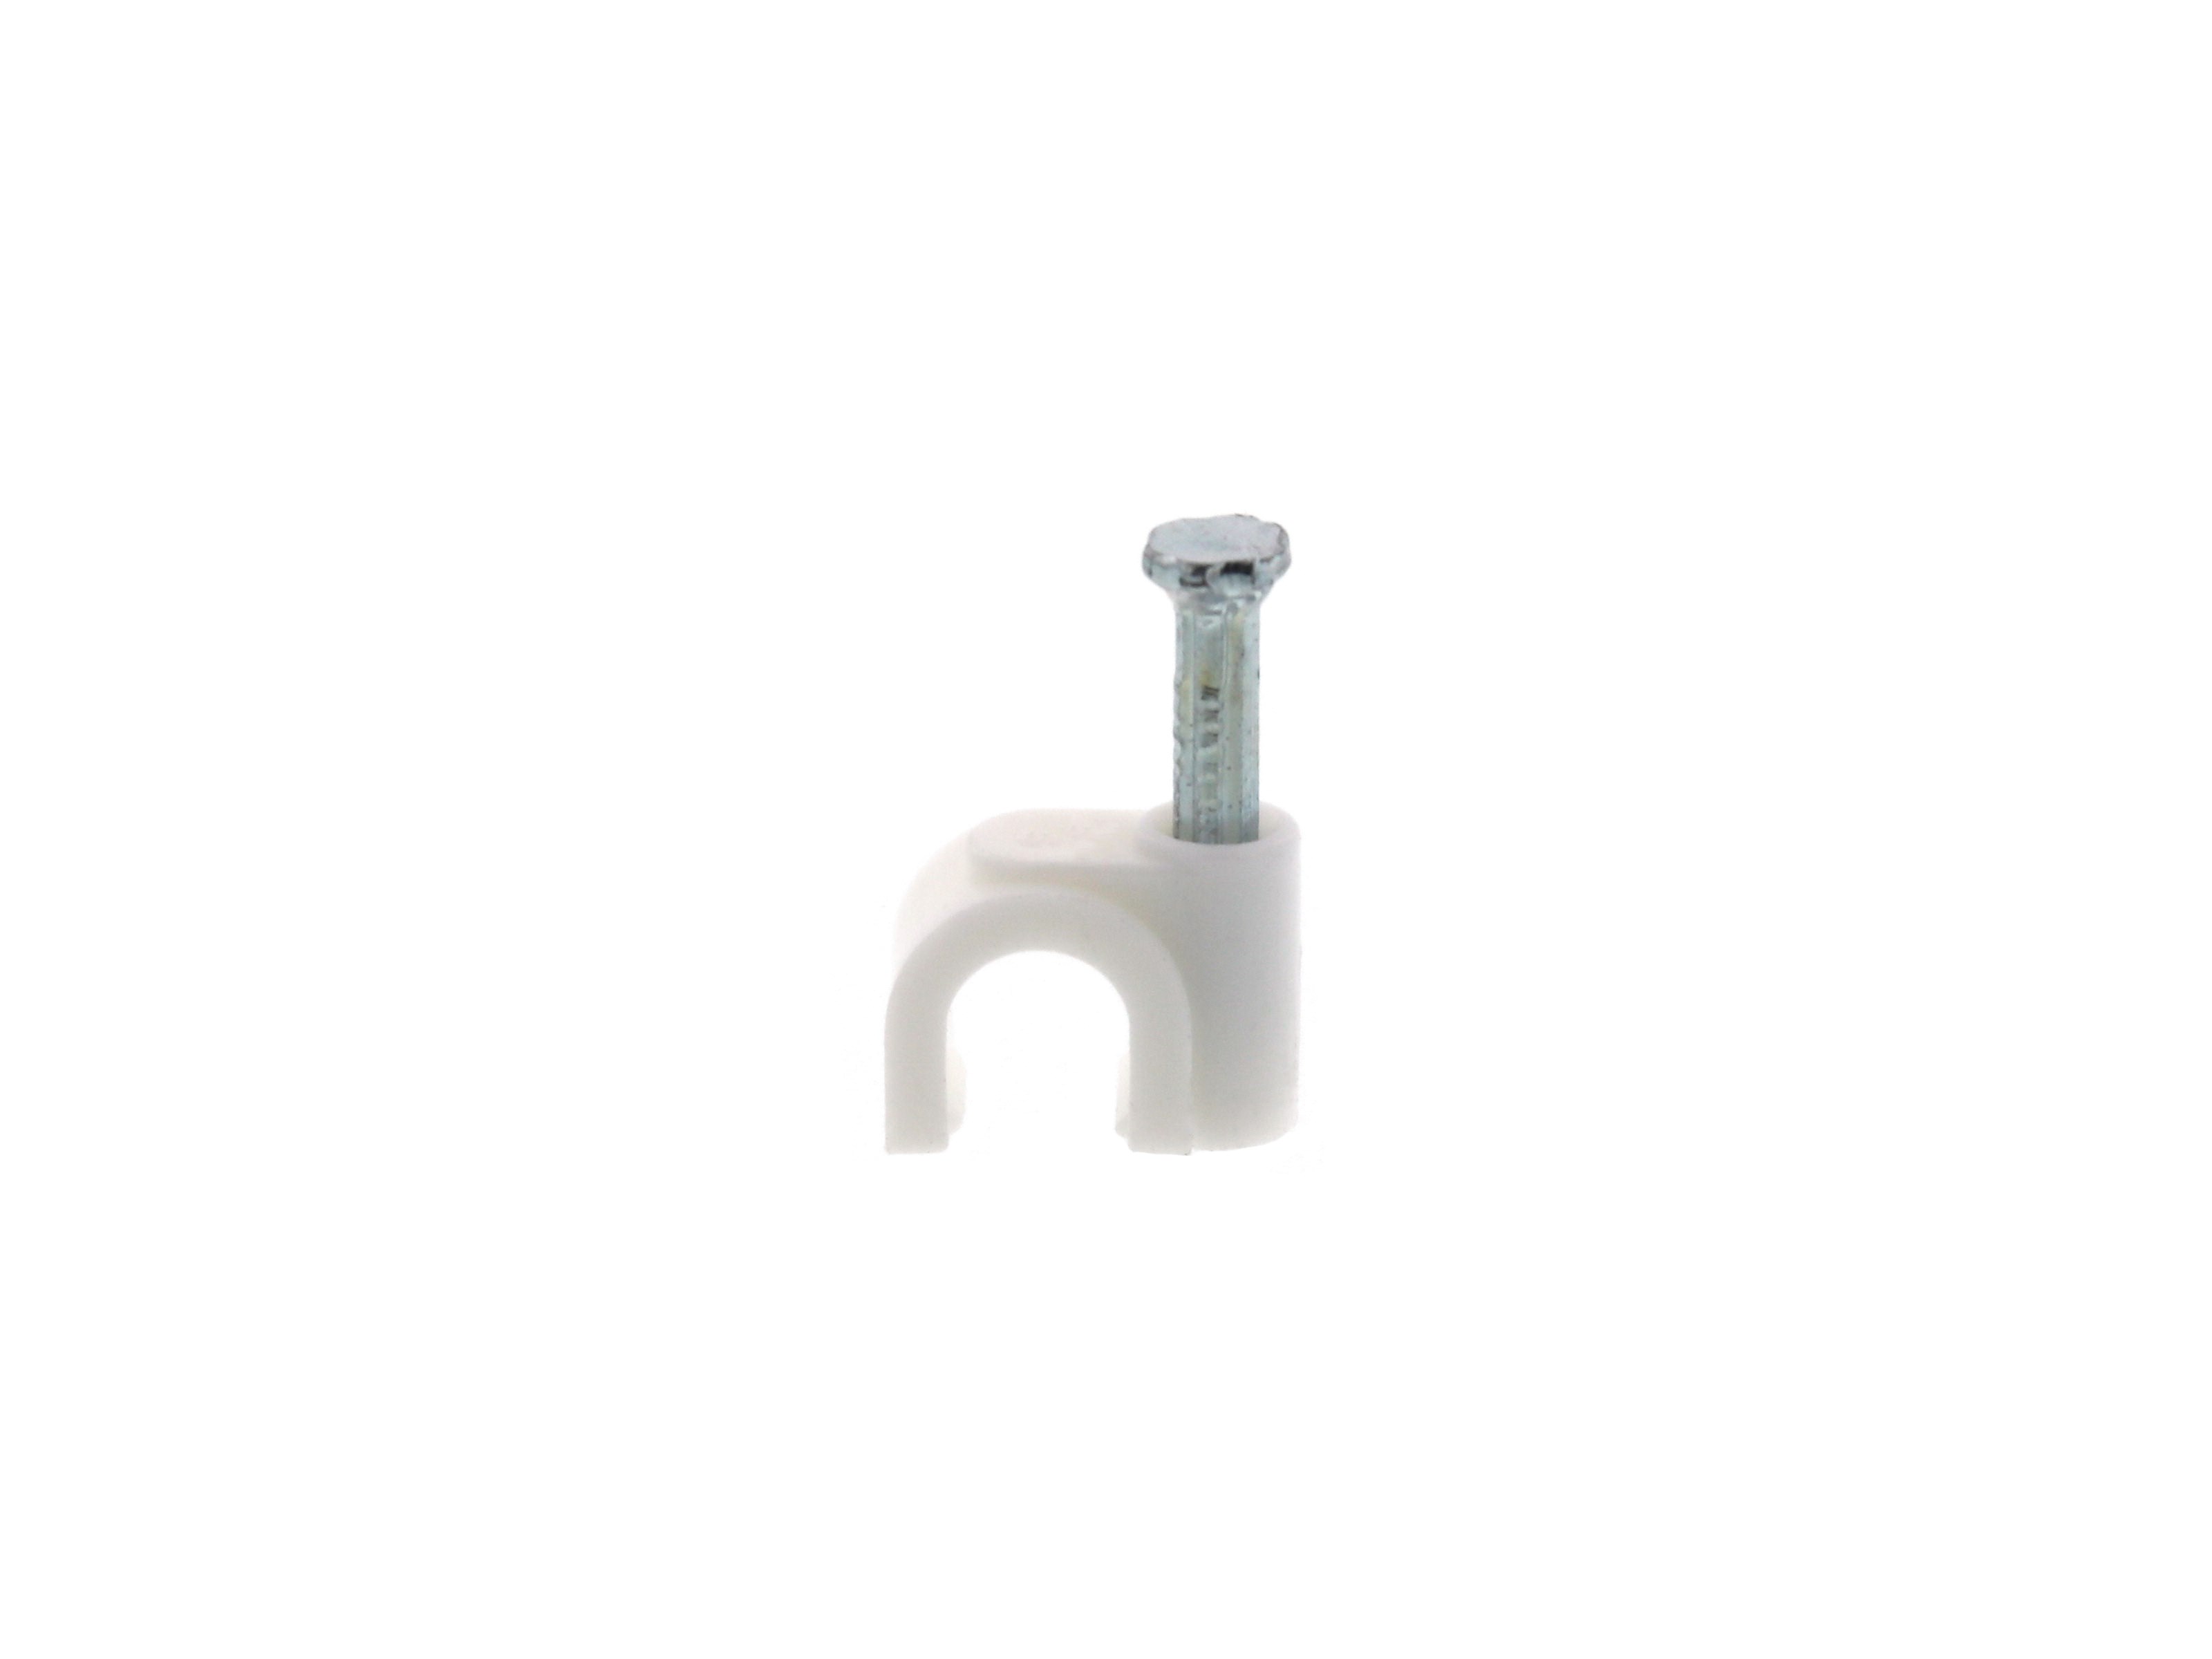 RG6 Plastic Coaxial Cable Nail Clip box of 100 